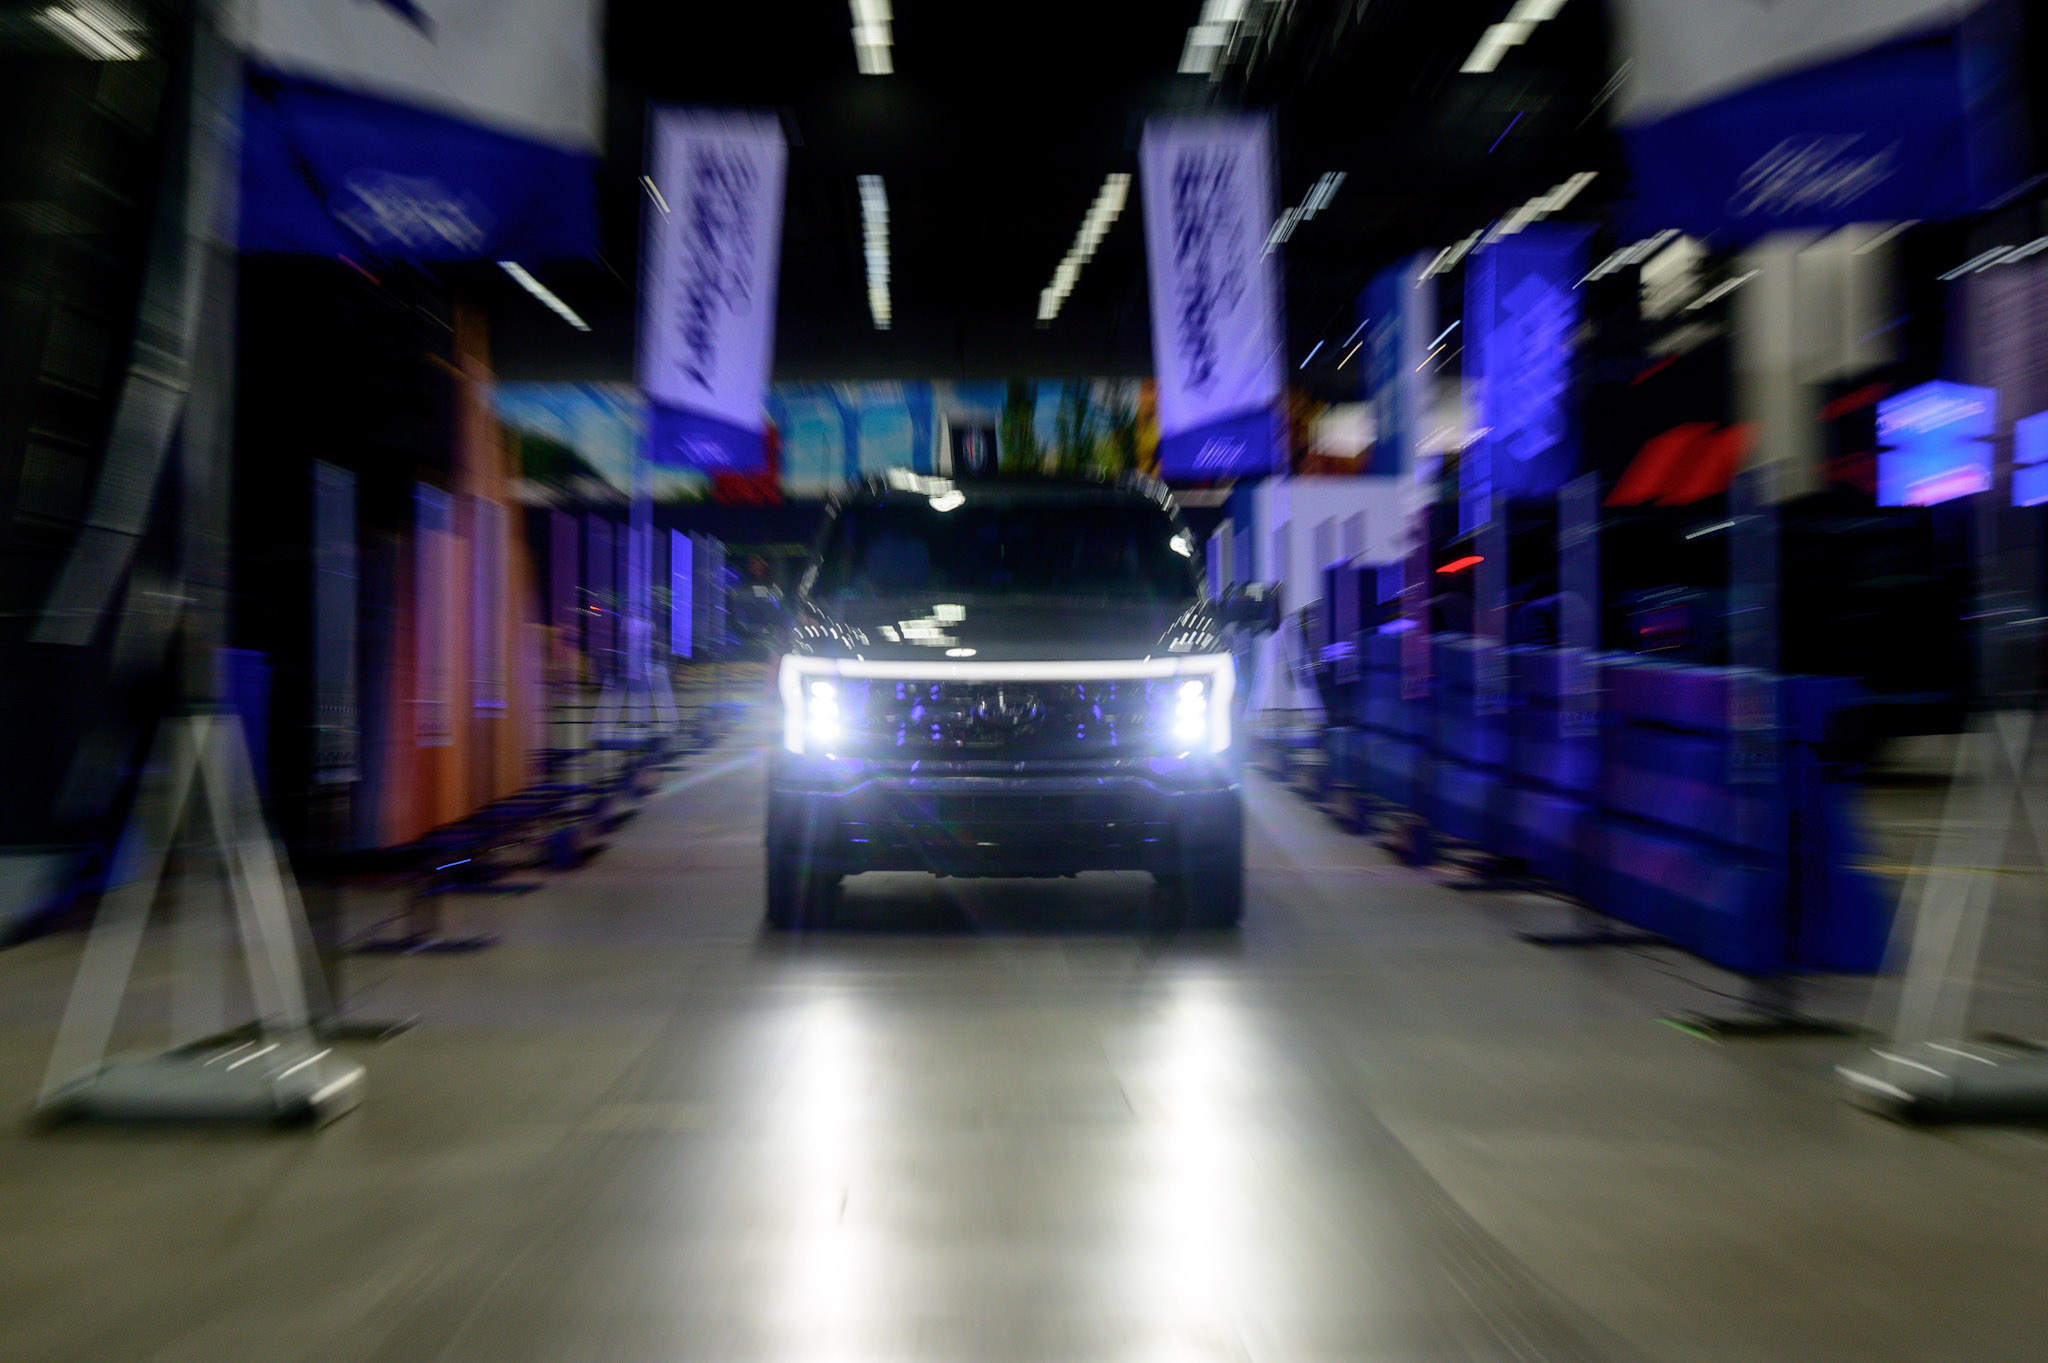 A Ford F-150 Lightning demonstrates at the 2022 North American International Auto Show begins with media preview day at Huntington Place in Detroit on Wednesday, Sept. 14 2022.